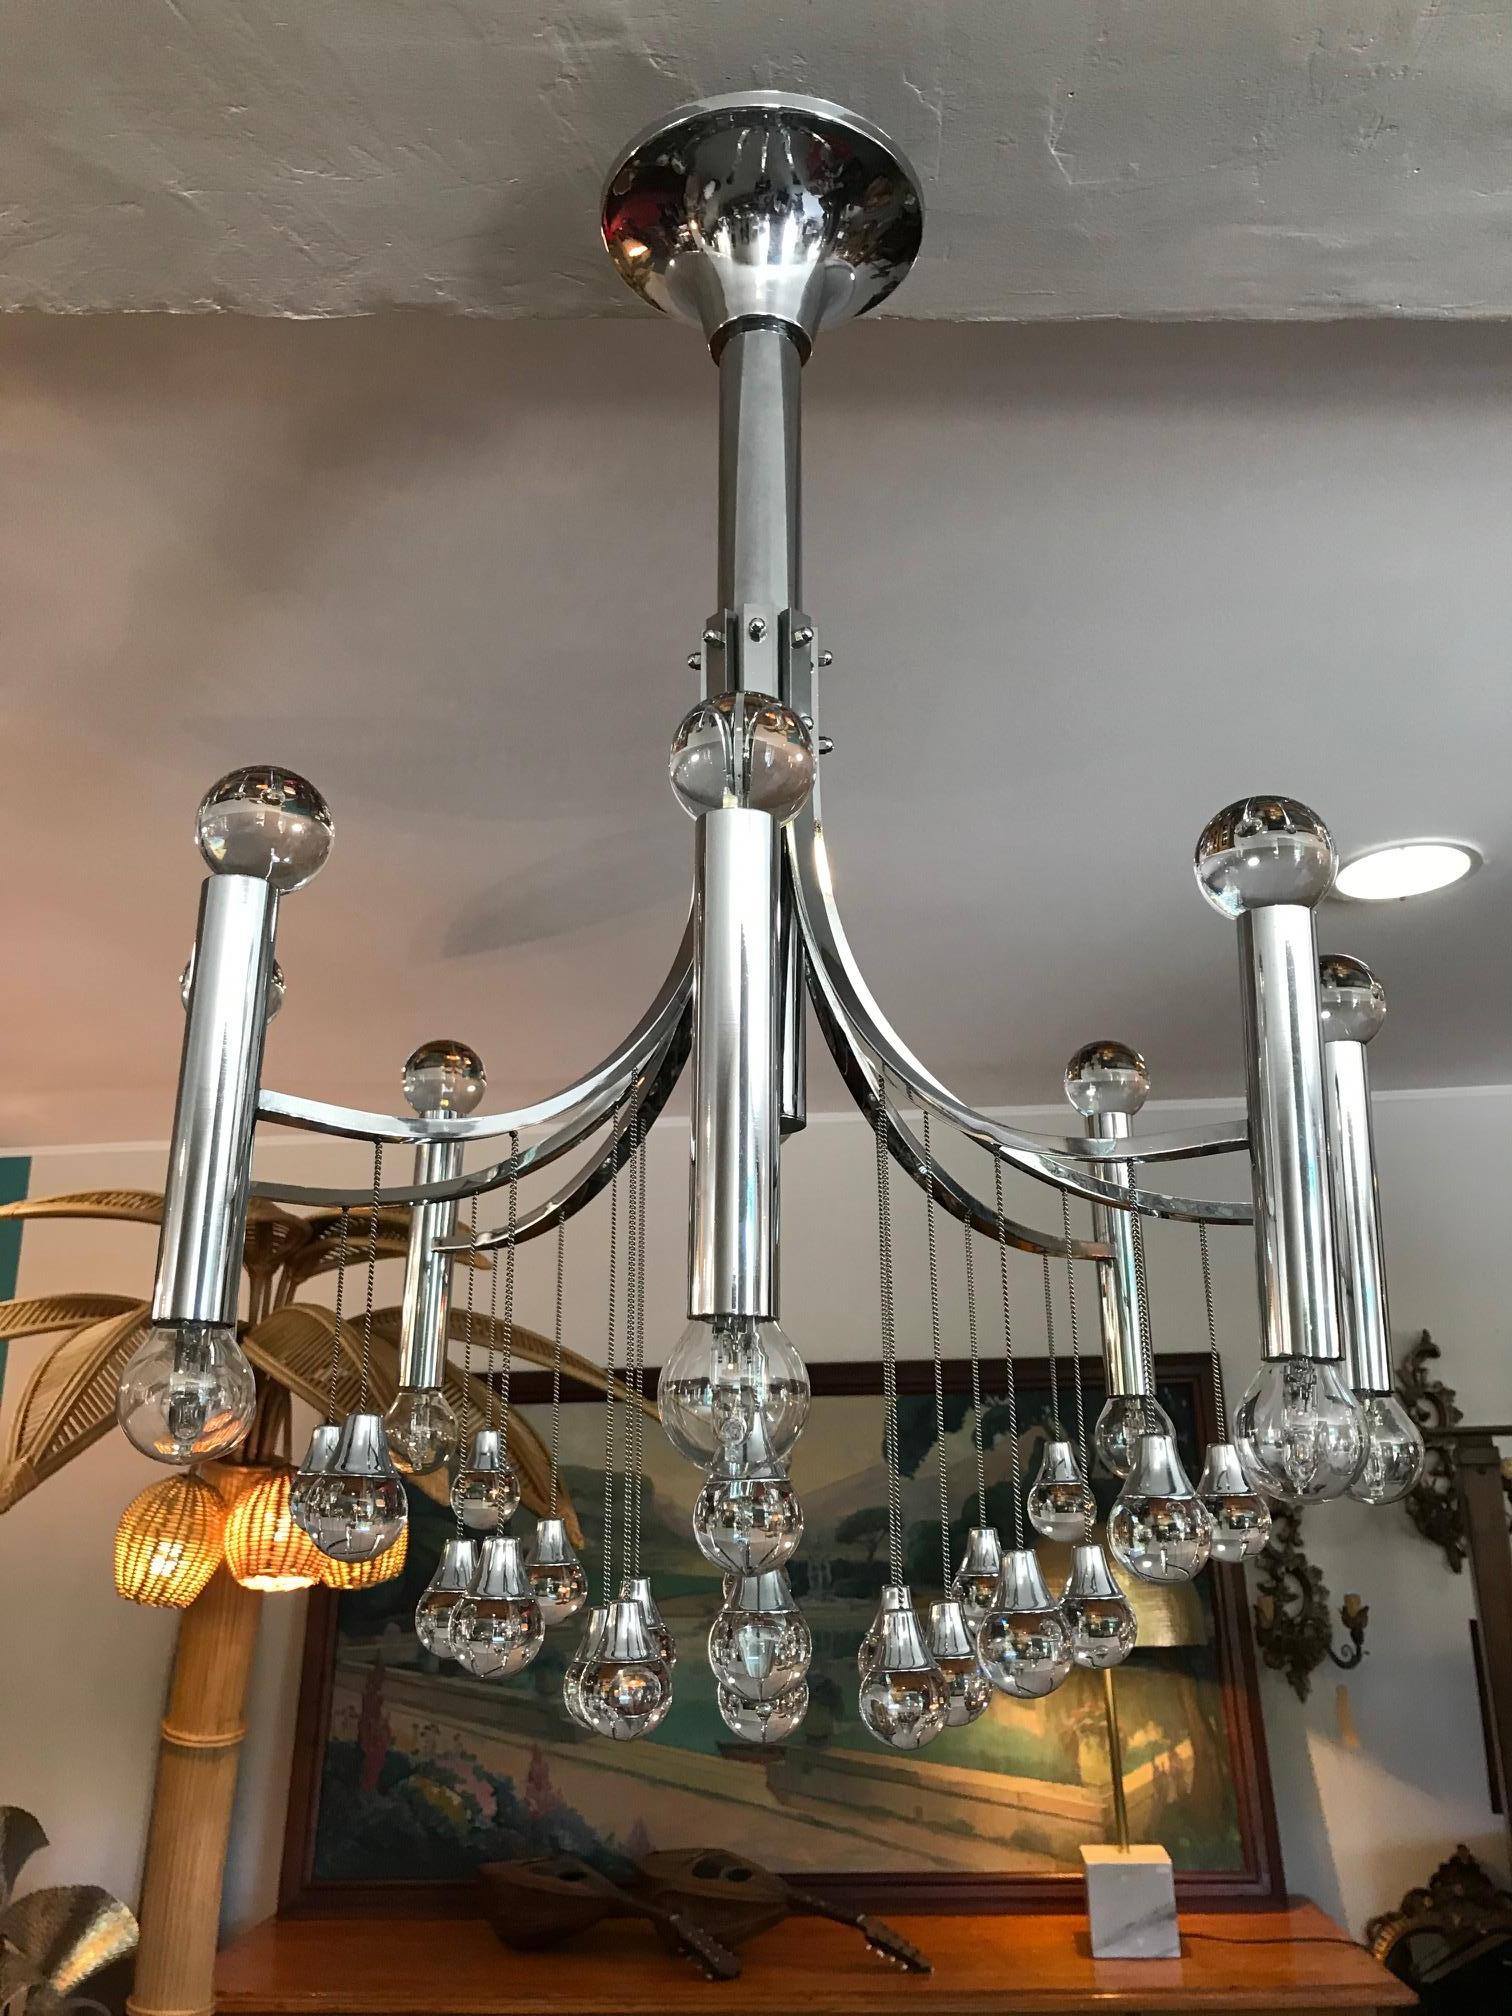 Chandelier, 1970s design, structure in chrome-plated stainless steel, on the lower part there are sphere-shaped crystals hanging from chains and 8 rods with small light points, on the upper part of these chrome-plated lamp holders there are other